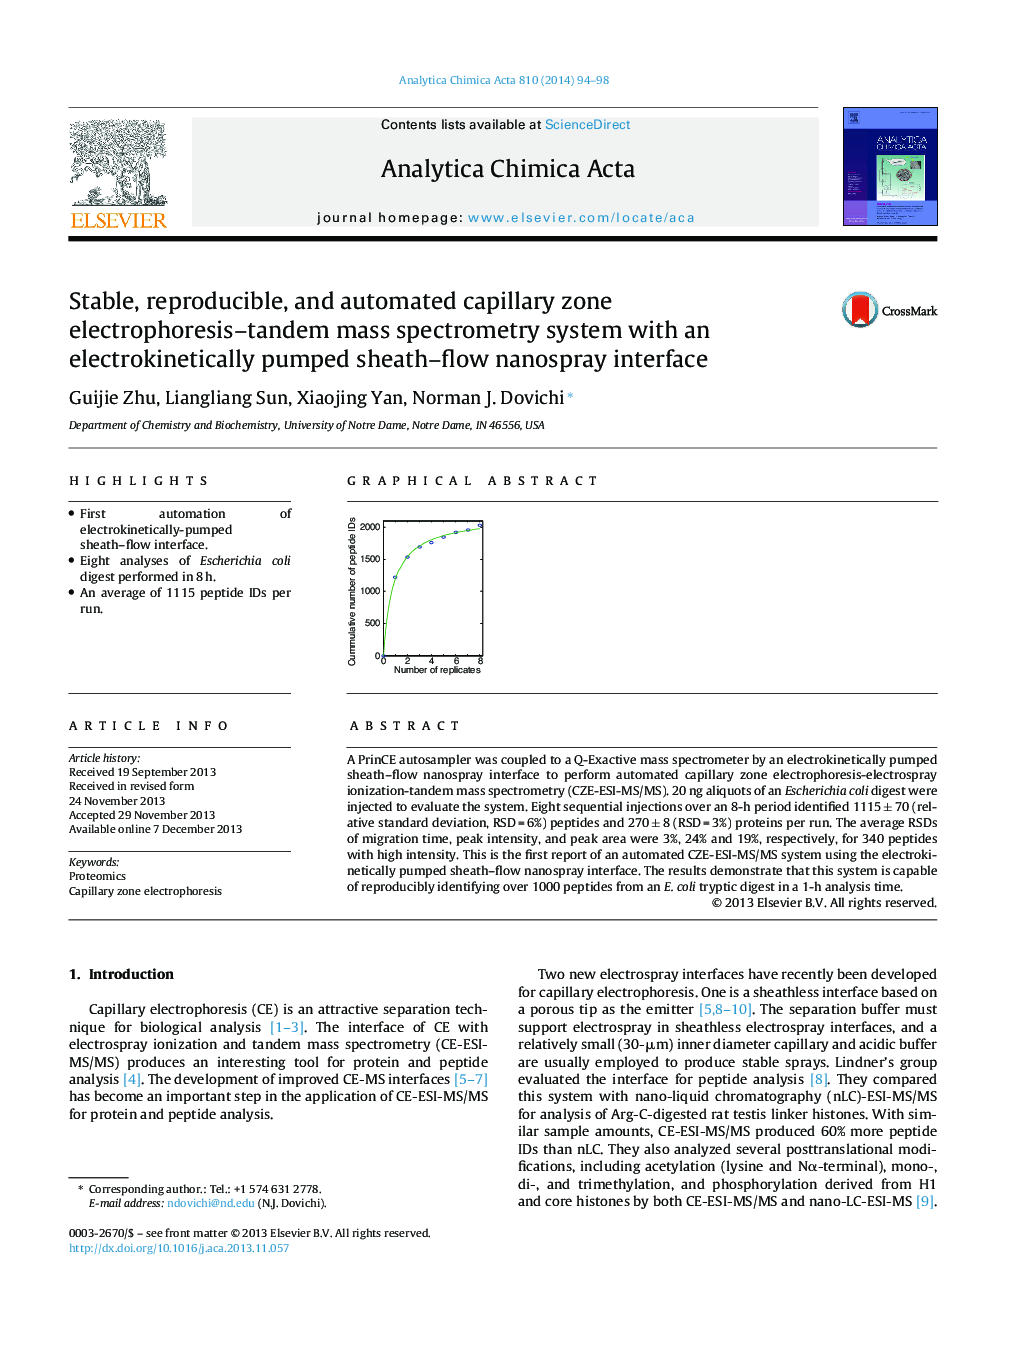 Stable, reproducible, and automated capillary zone electrophoresis–tandem mass spectrometry system with an electrokinetically pumped sheath–flow nanospray interface